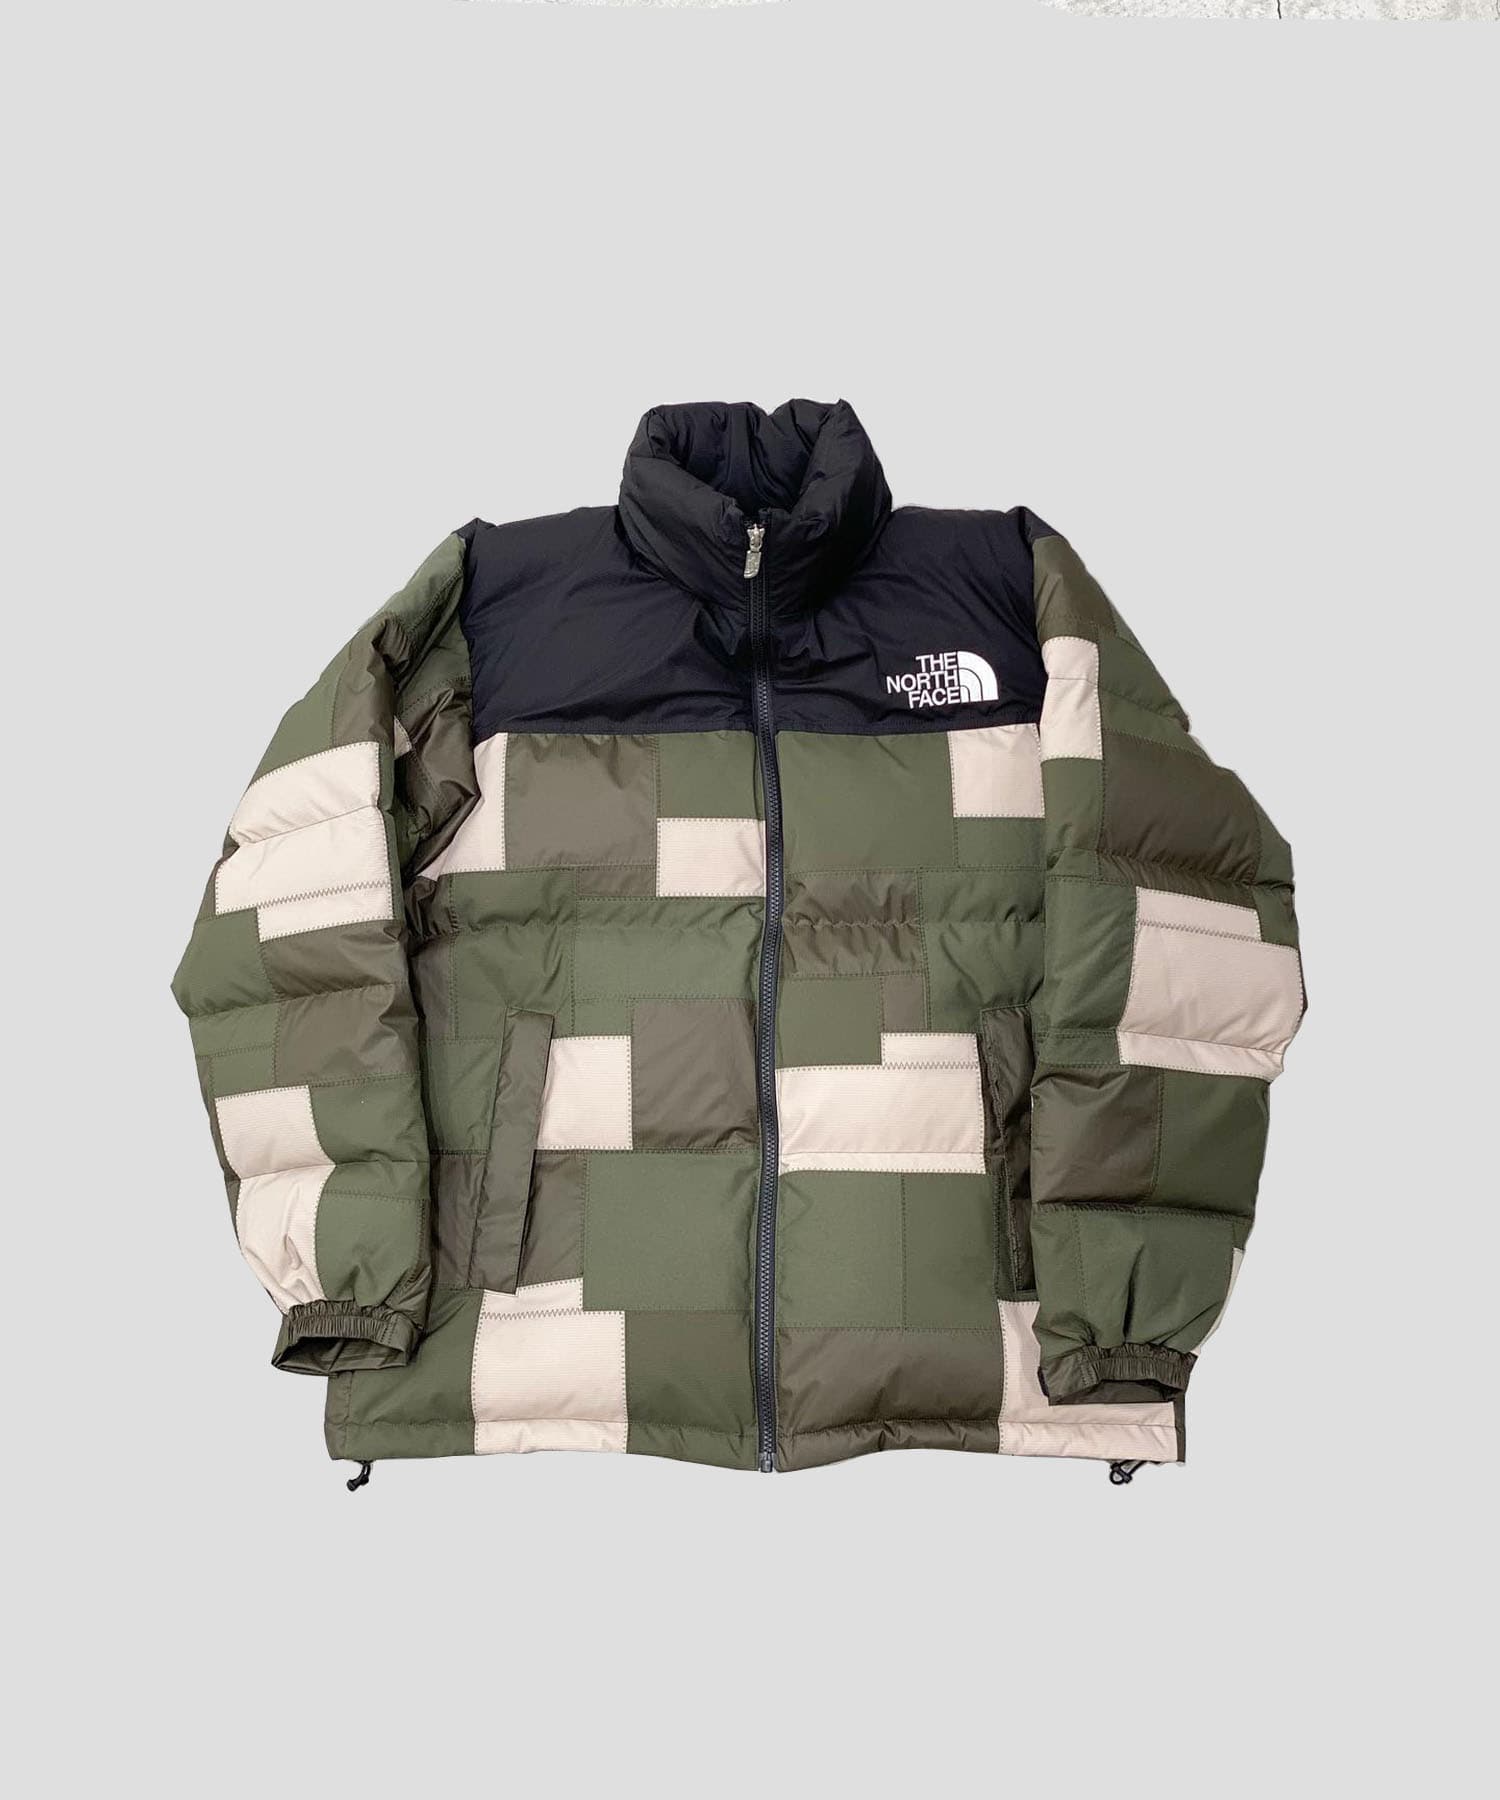 THE NORTH FACE Nuptse Jacket MADE IN JAPAN